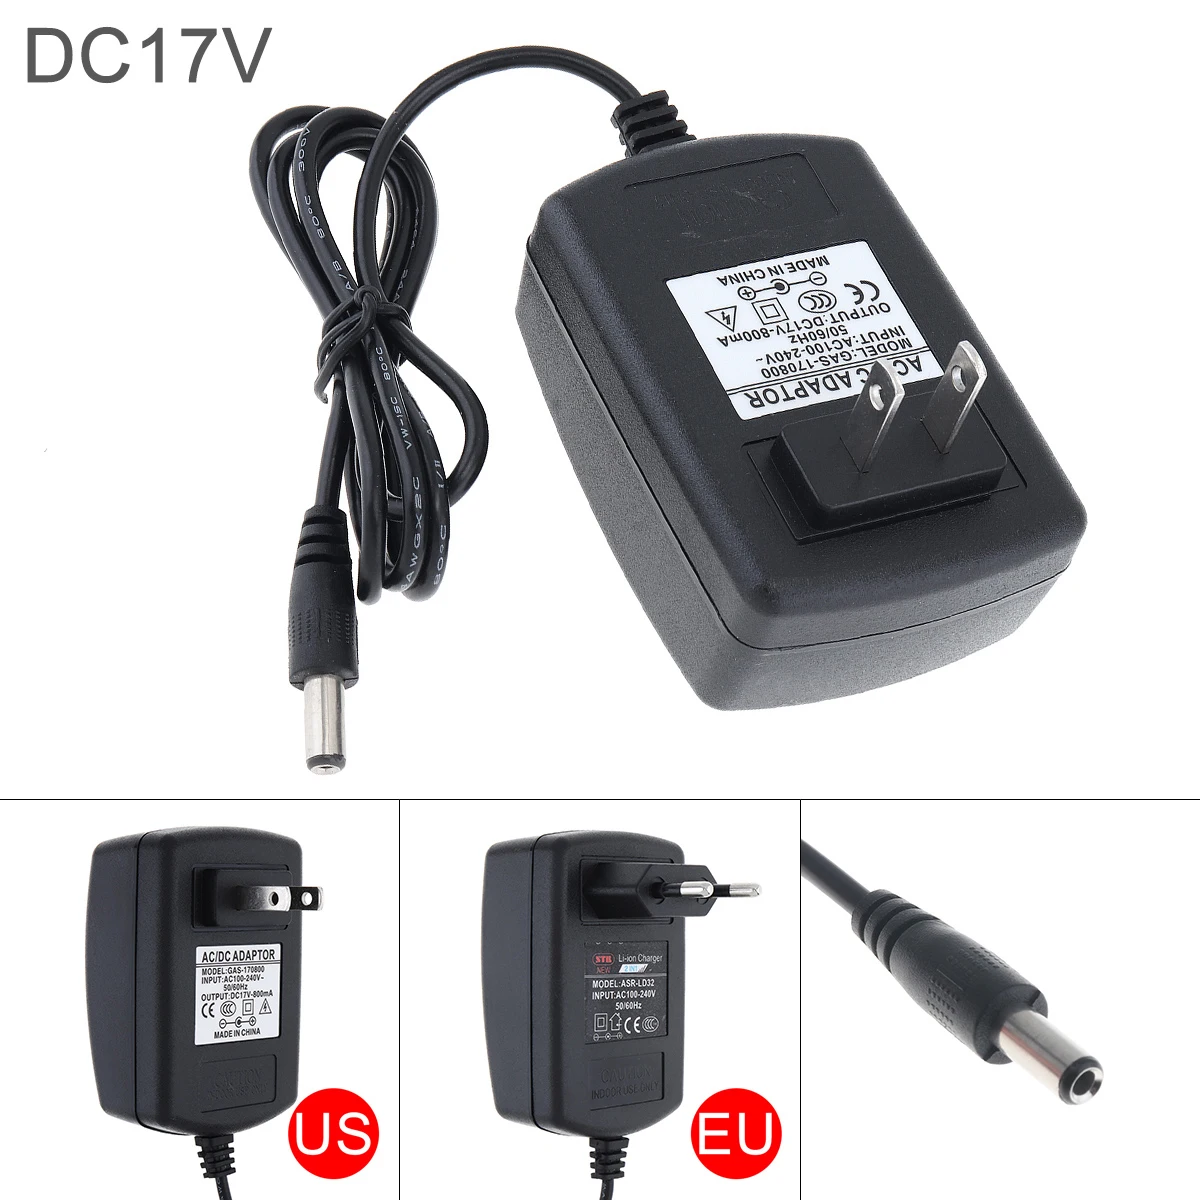 80cm Universal DC 16.8-17V Lithium Battery Rechargeable Charger 100-240V Power Supply for Lithium Electrical Drill Screwdriver